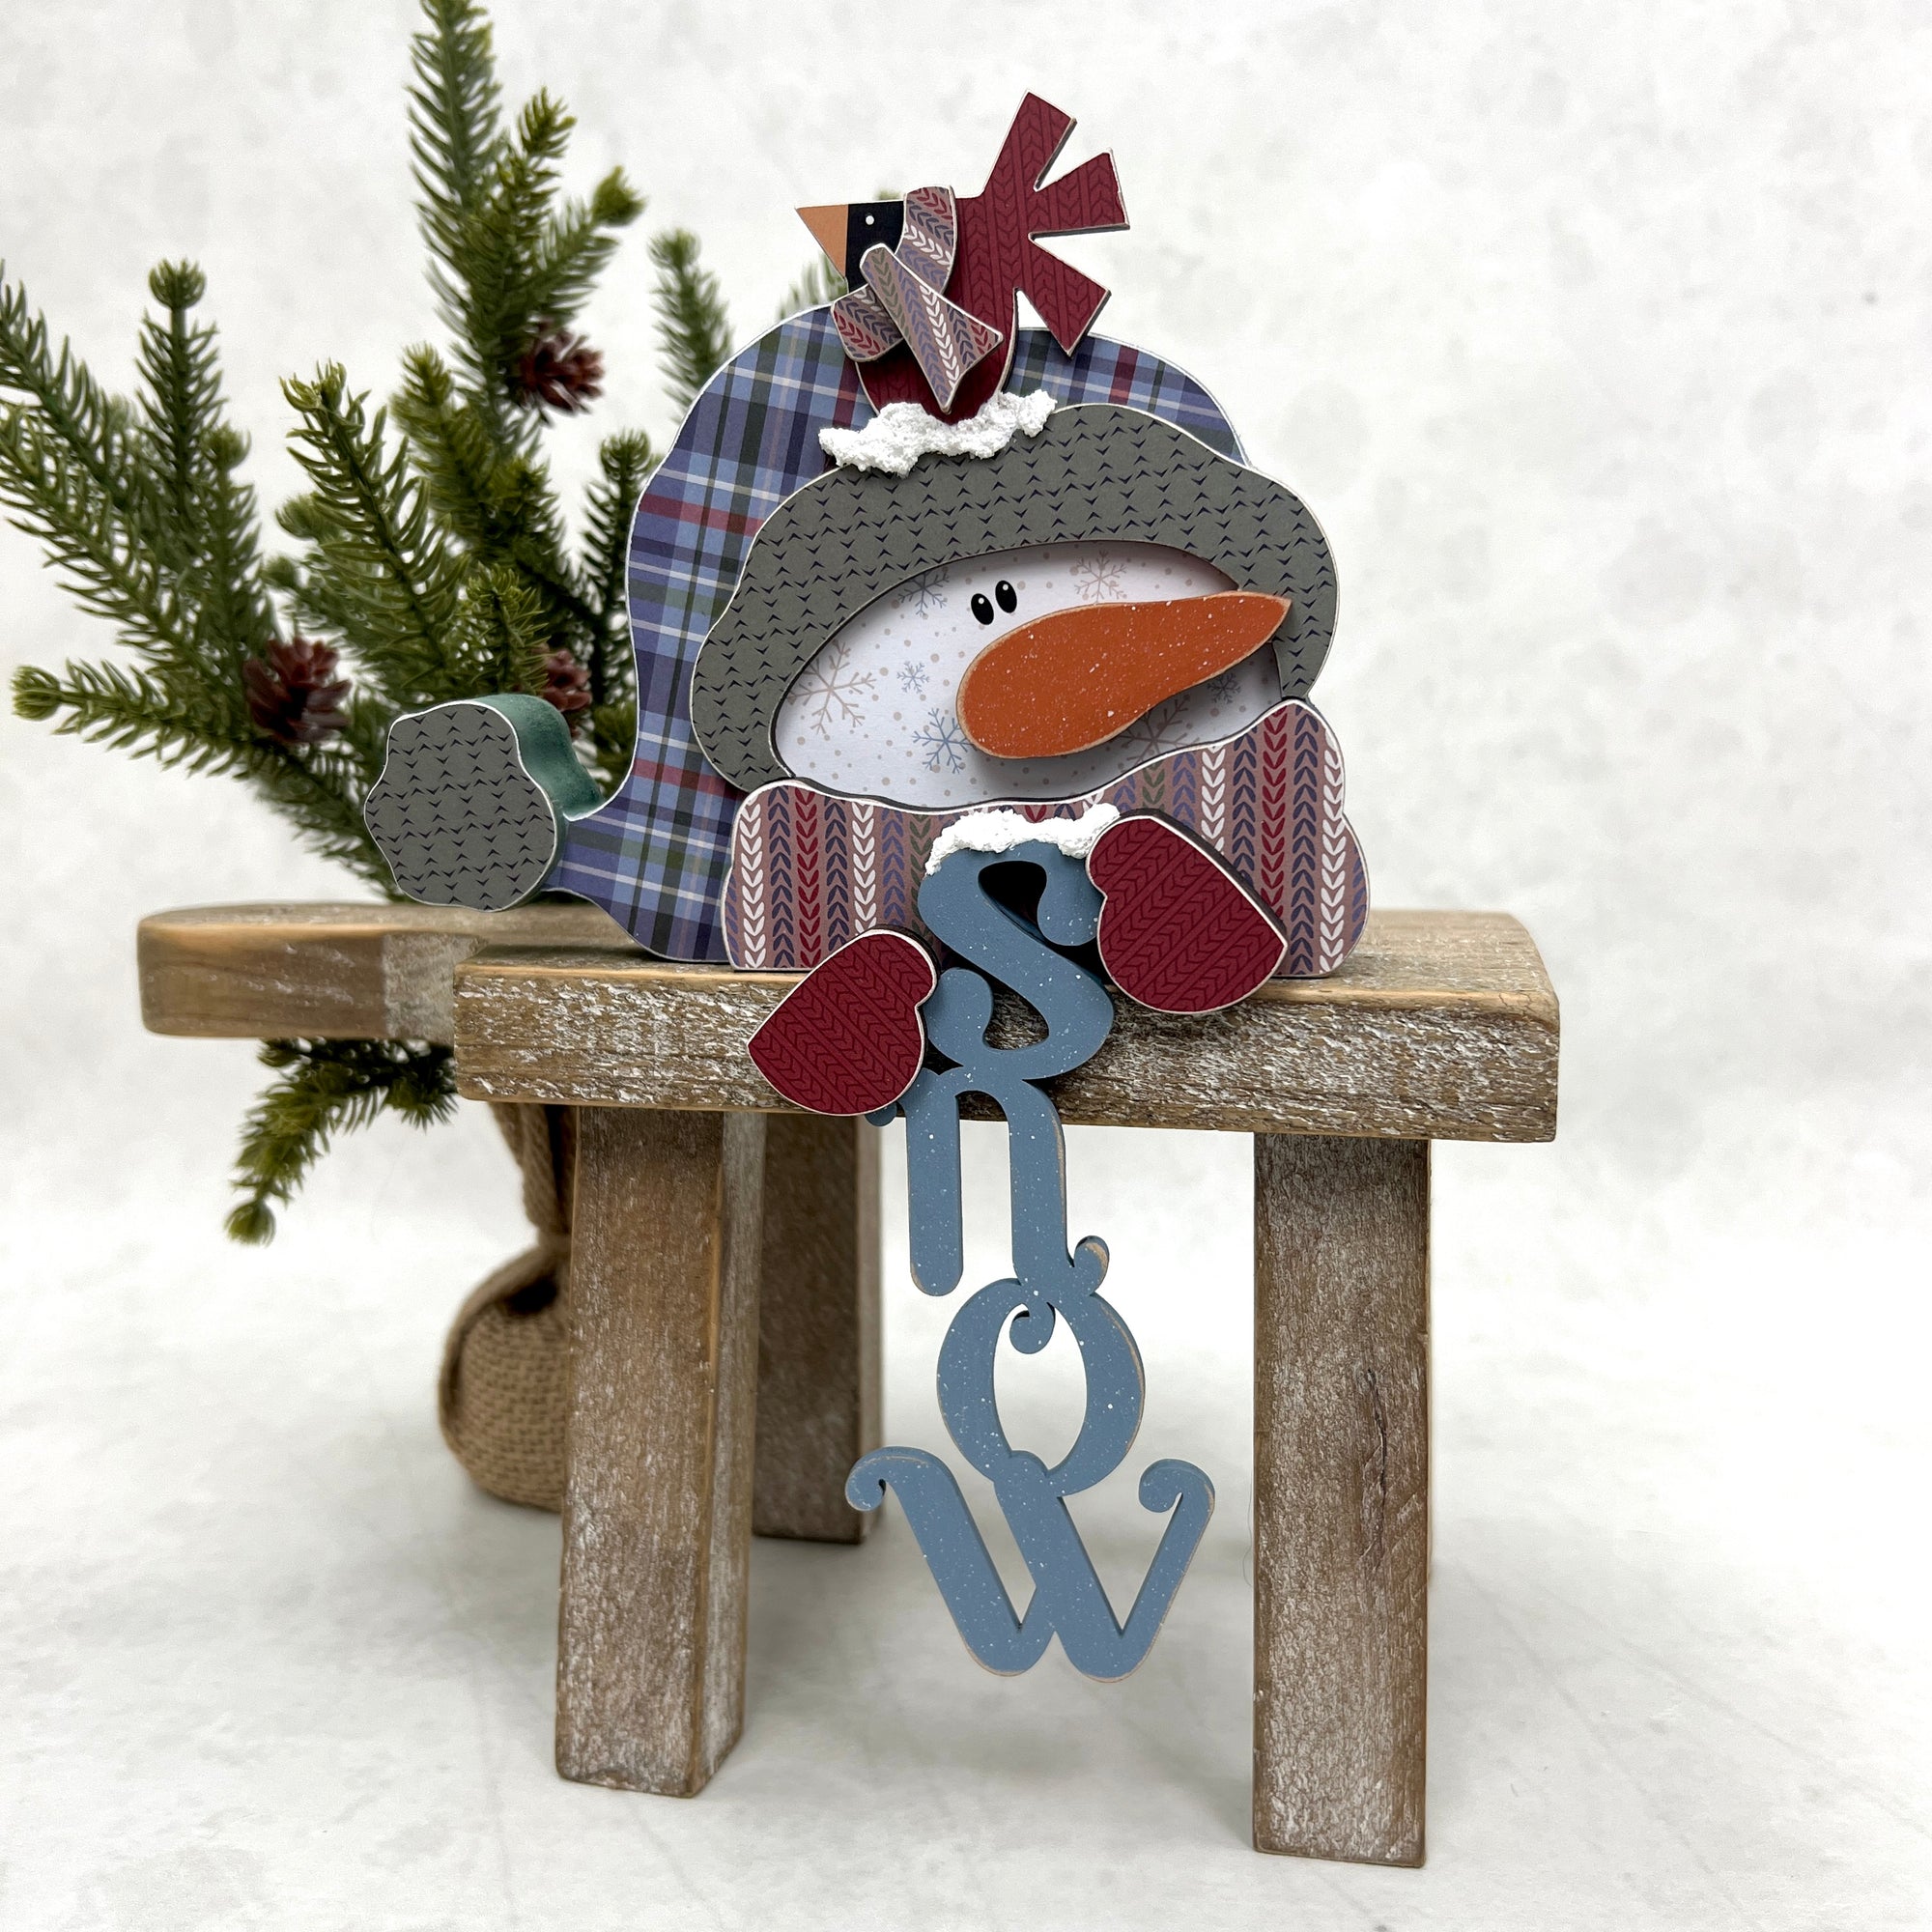 Wood decor snowman holding the word snow in his hands. Winter wood craft kit for tiered trays, table tops, and shelf sitters.